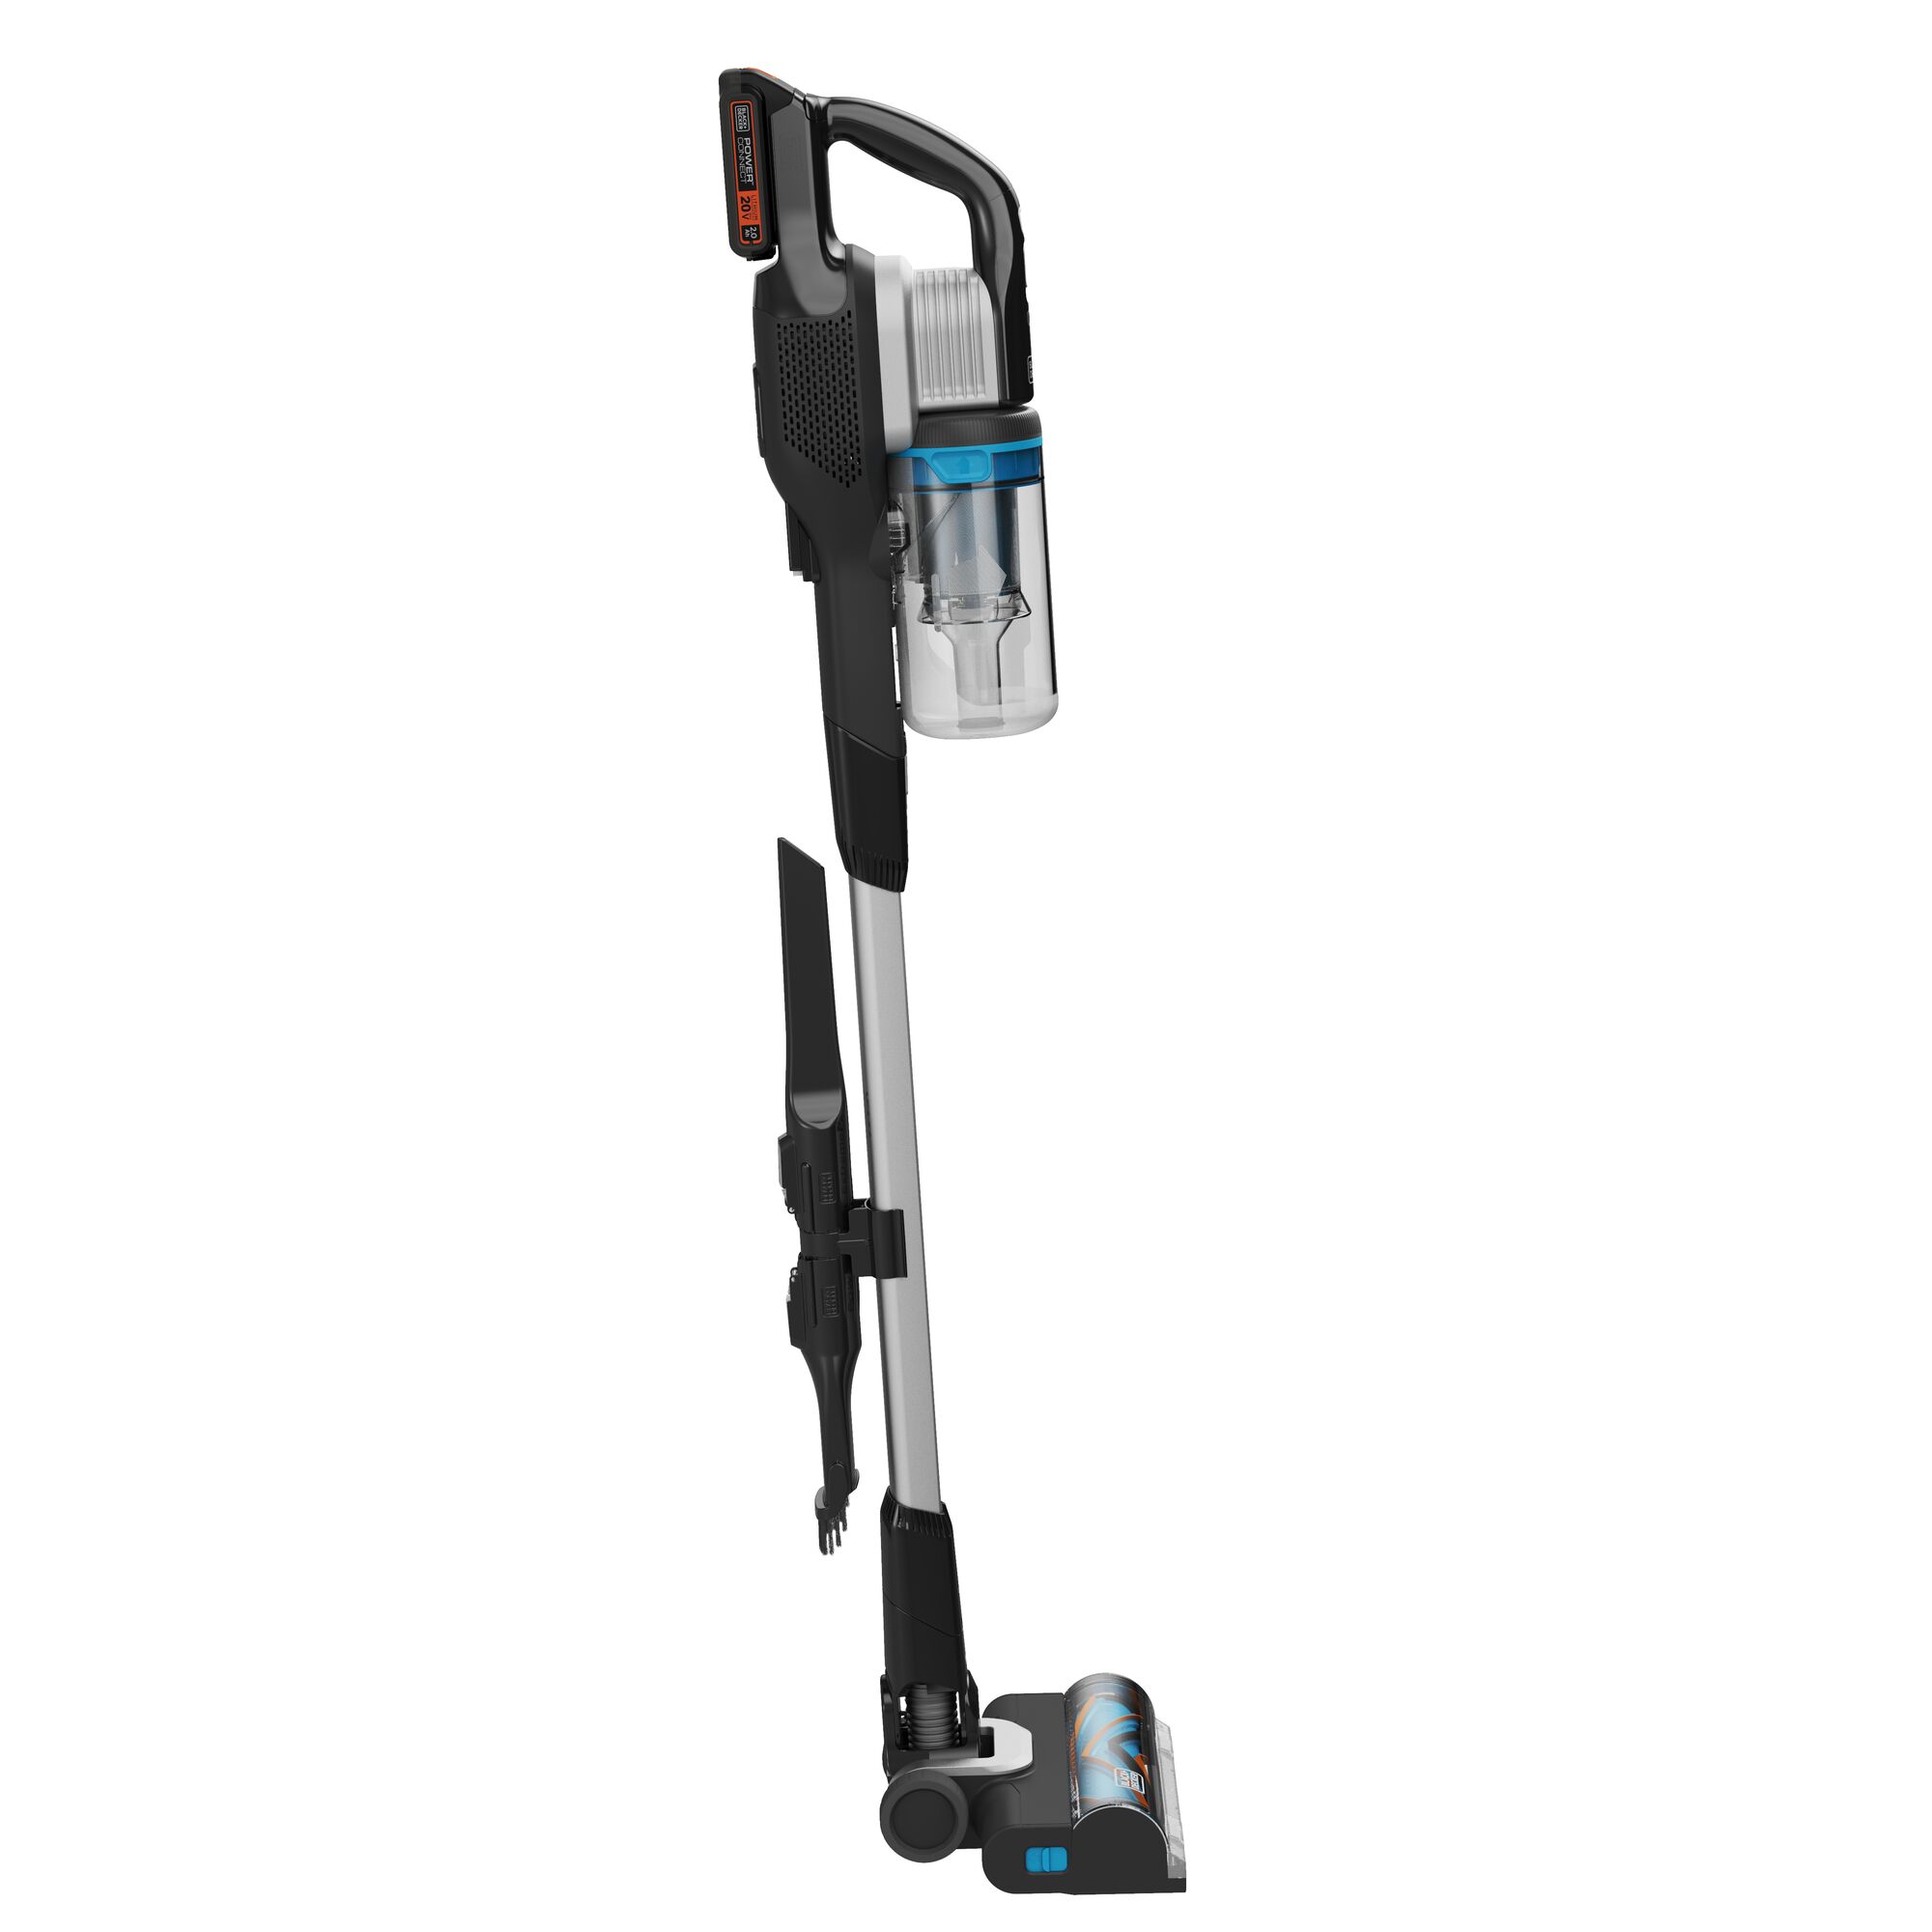 Side view of the BLACK+DECKER POWERSERIES Extreme MAX Cordless Stick Vac with LED head lights on